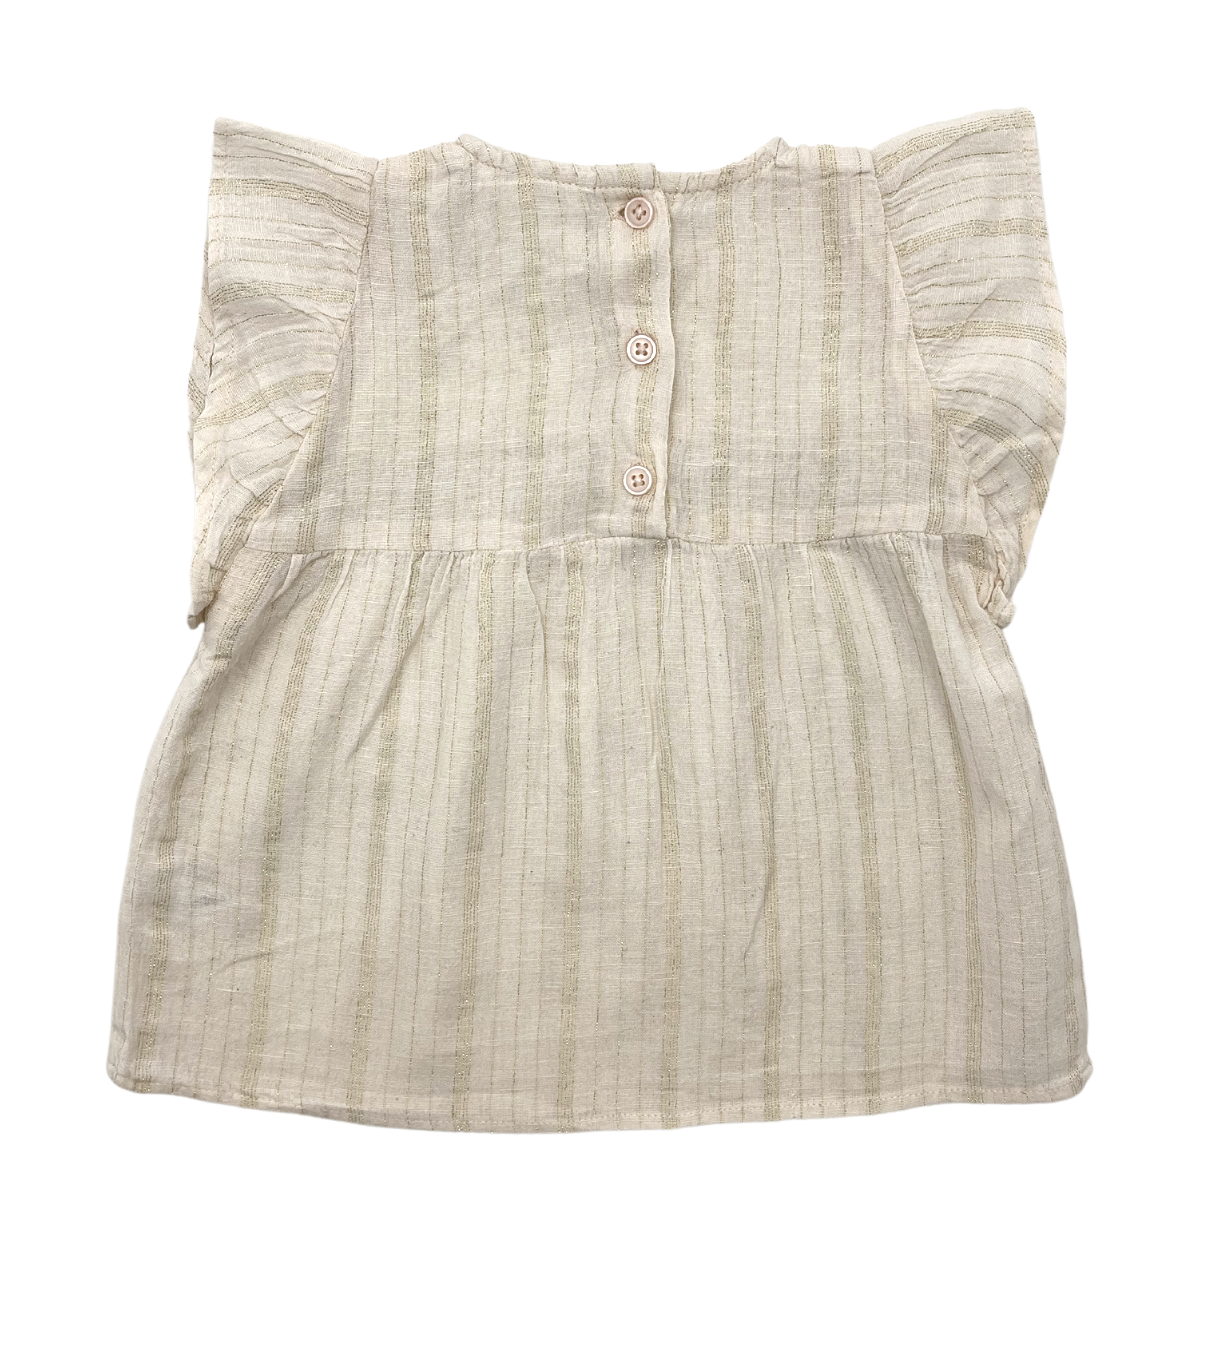 LOUIS LOUISE - Beige &amp; gold blouse - 2 years old